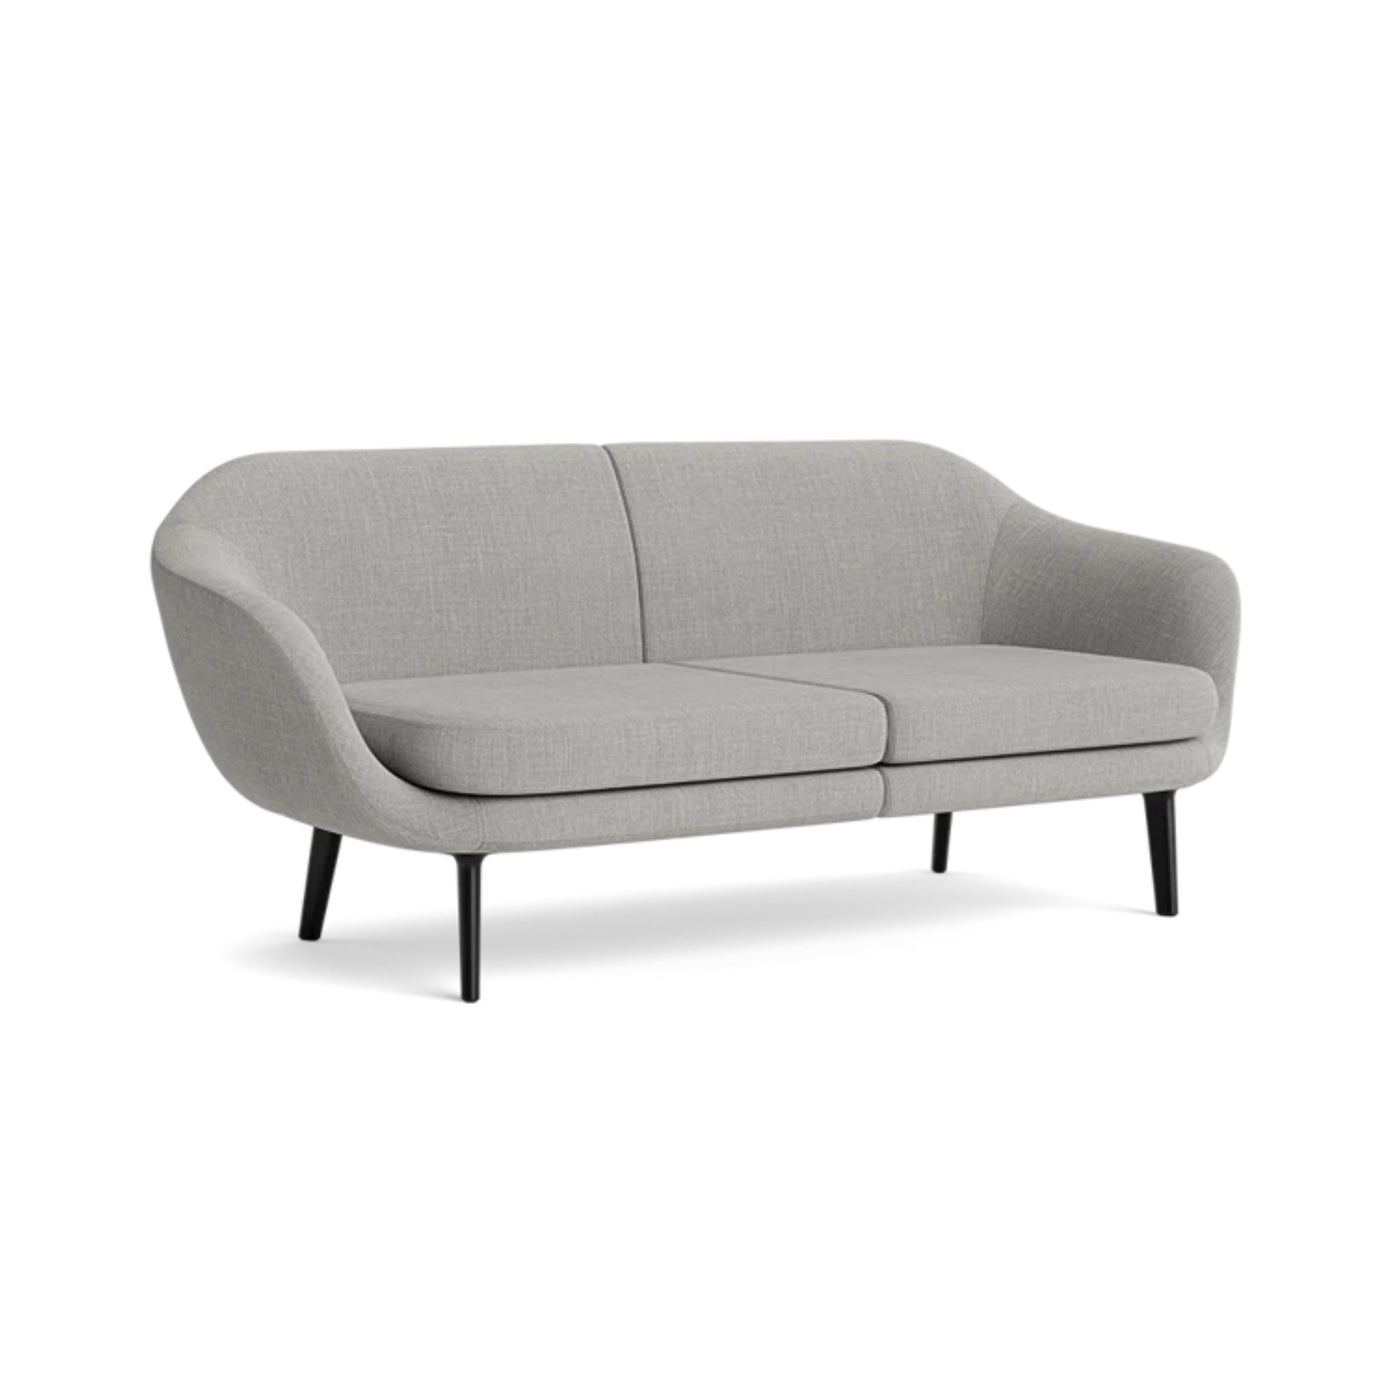 Normann Copenhagen Sum Modular 2 Seater Sofa. Made to order from someday designs. #colour_remix-133